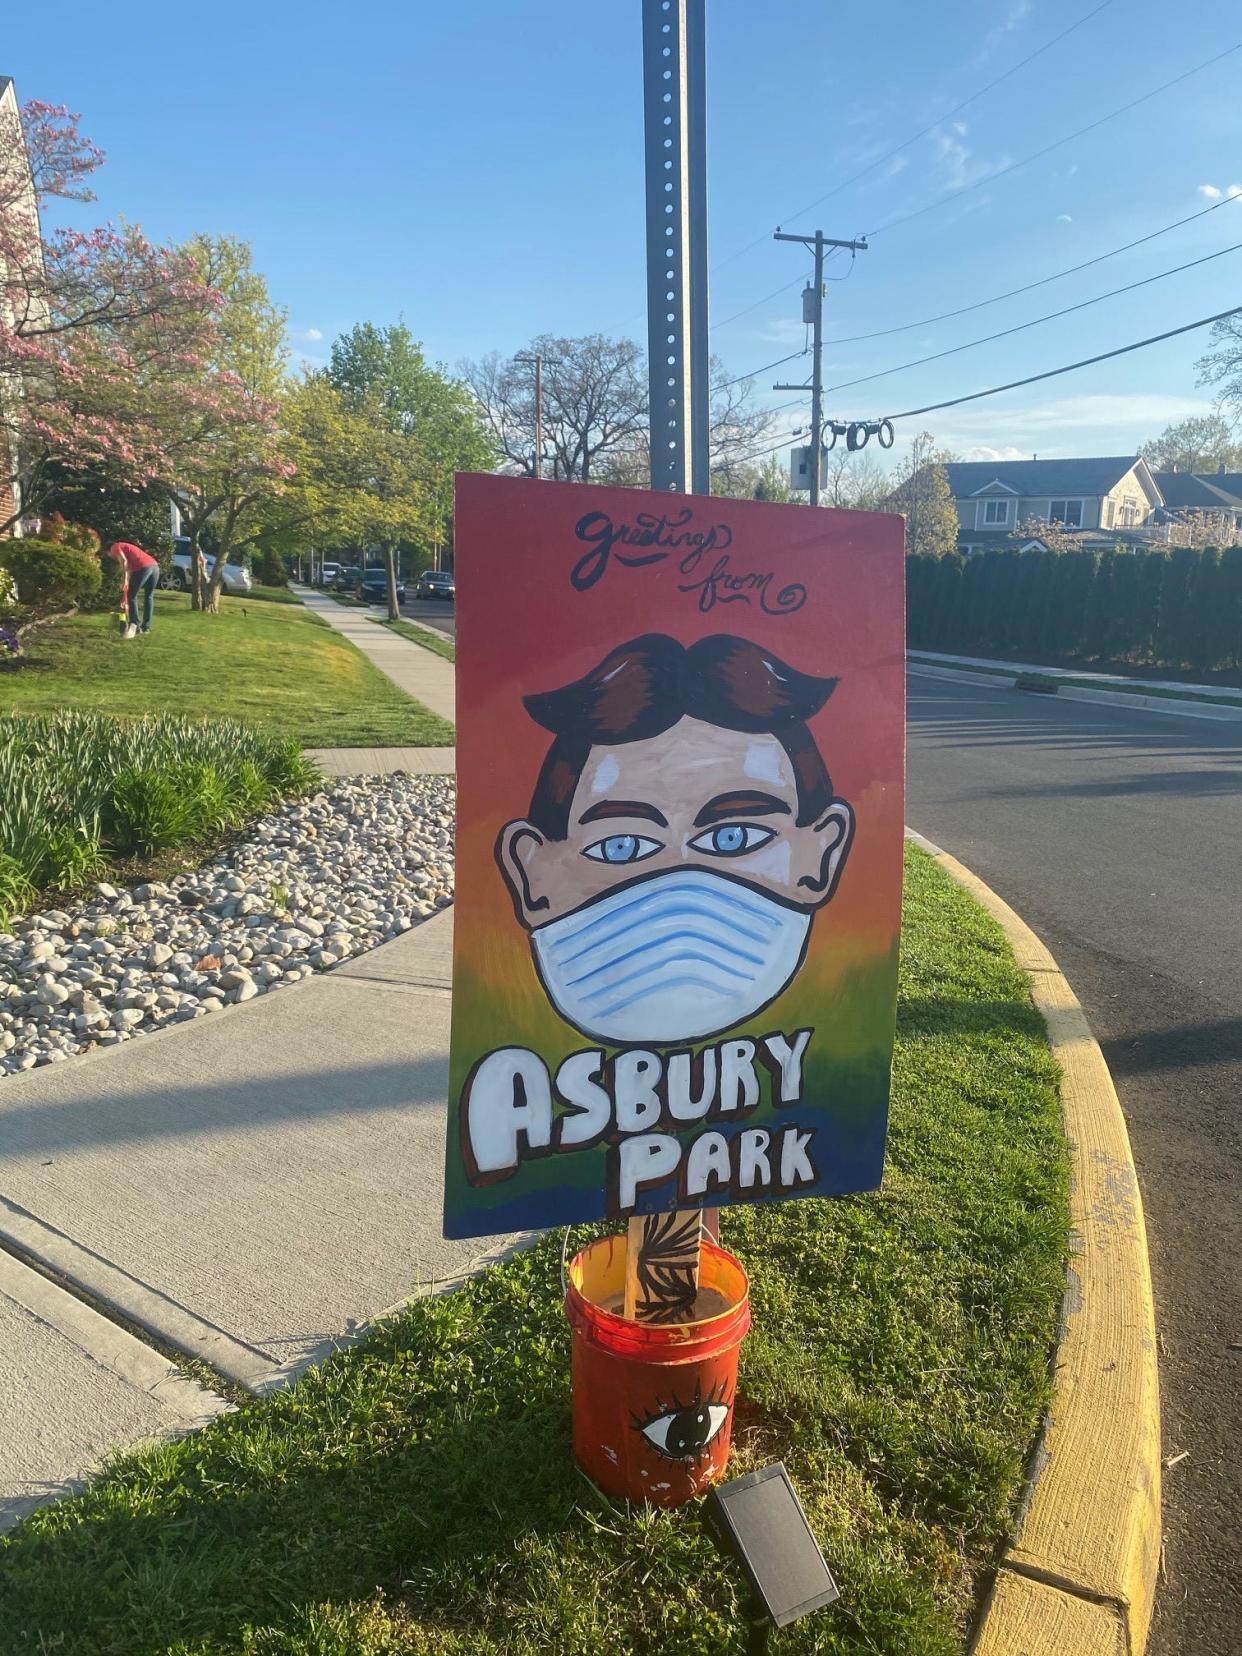 In 2020, this "Greetings from Asbury Park" sign featuring Tillie wearing a face mask welcomed visitors entering the town on Sunset Avenue.